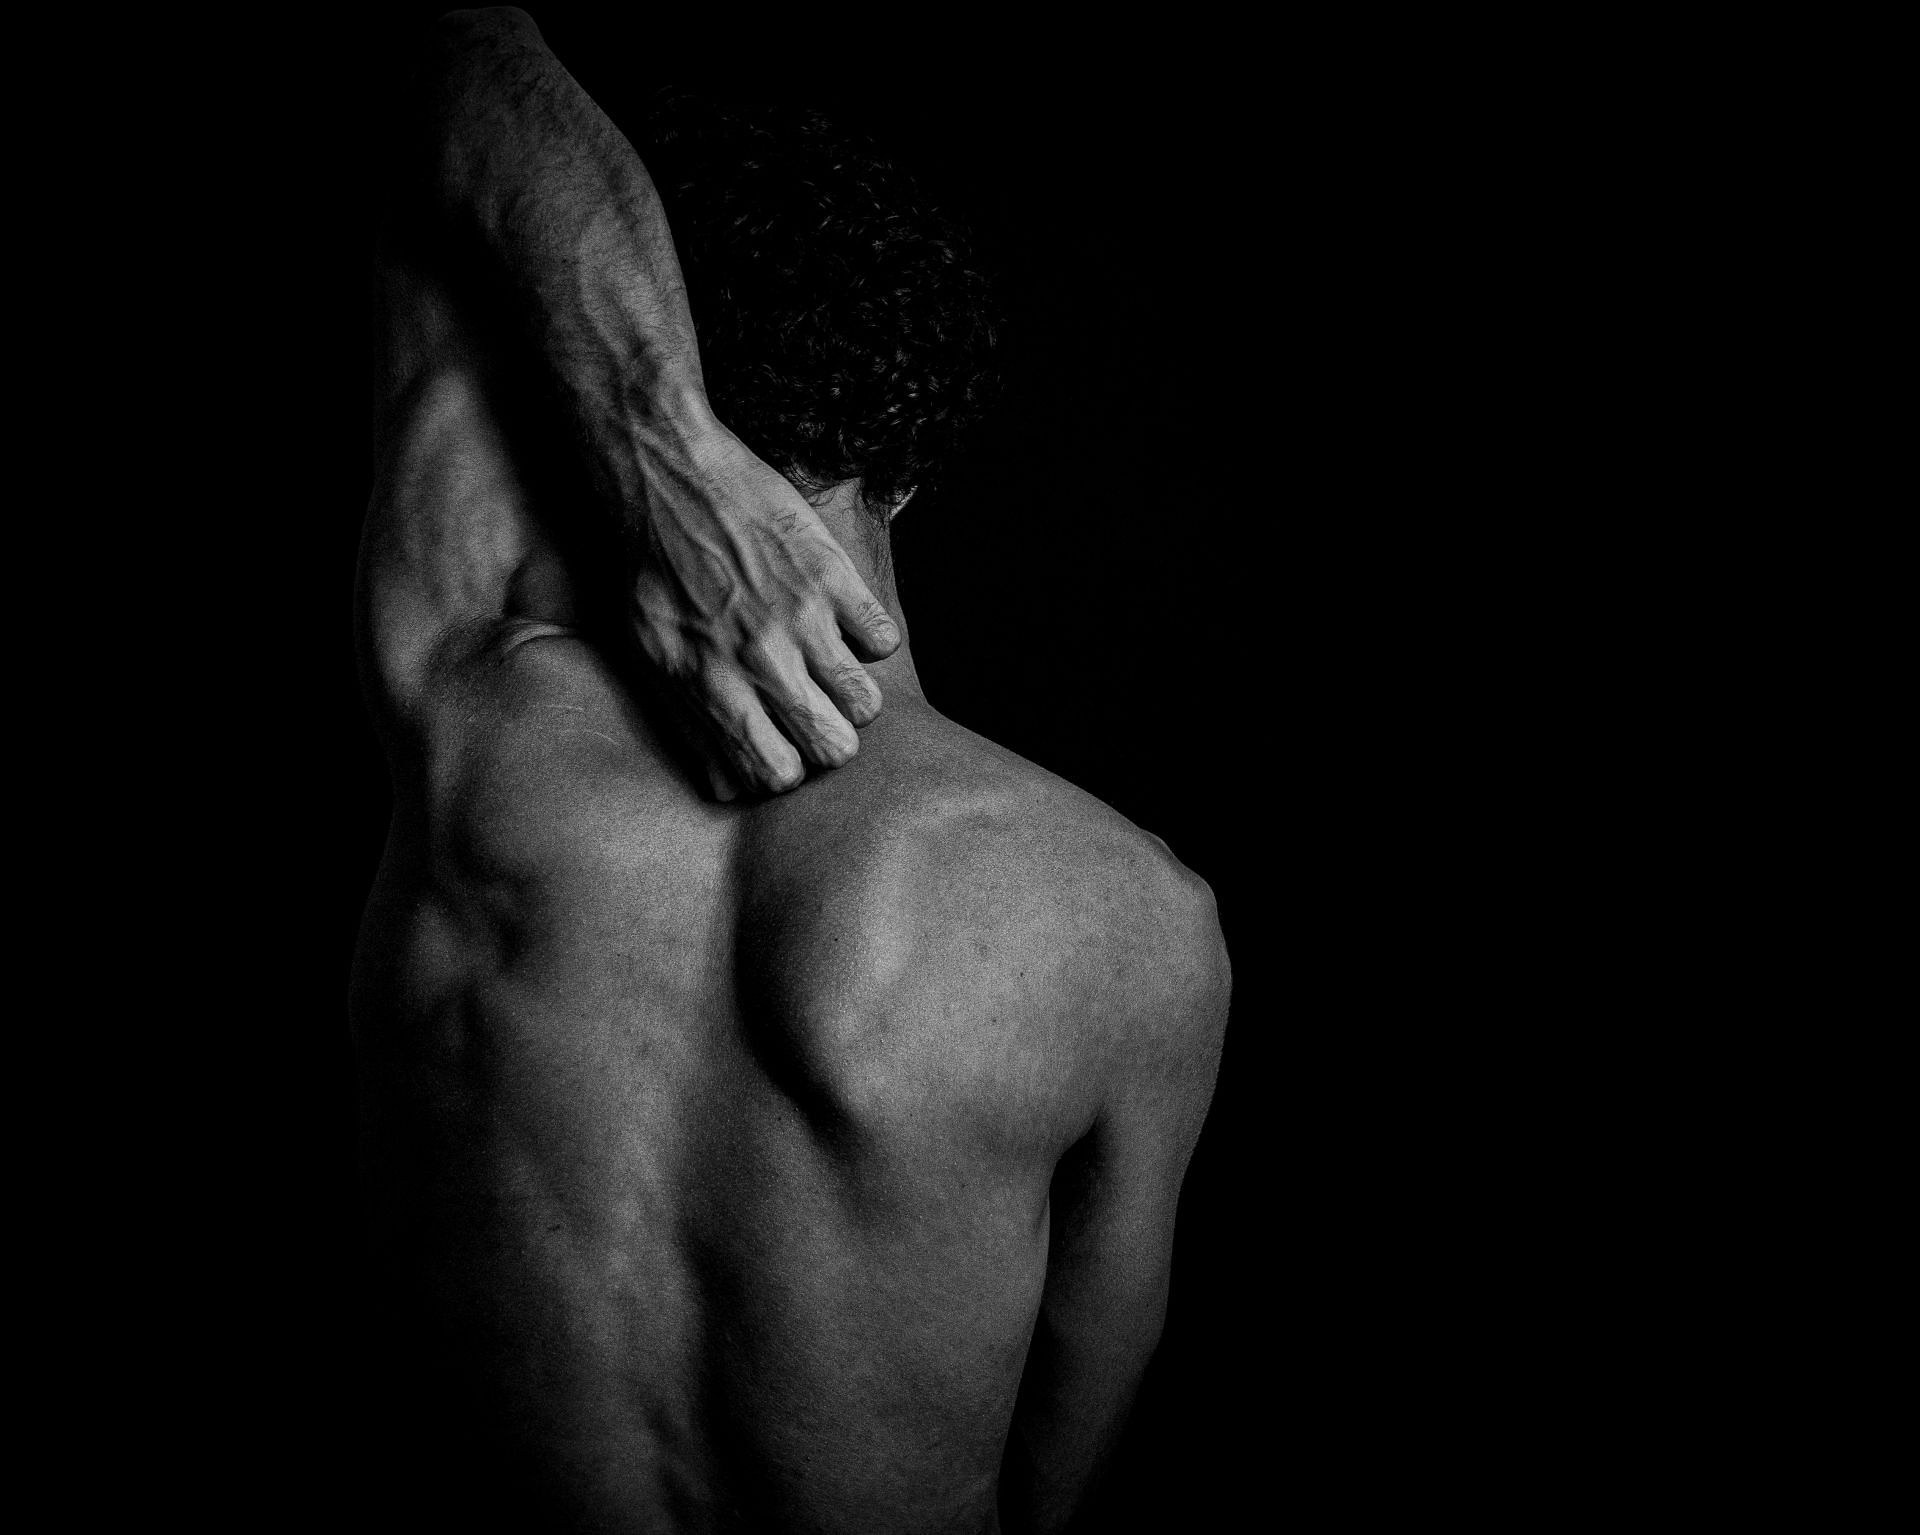 The symptoms of winged scapula differ from person to person, depending on the actual reason as well as the nerves and muscles involved. (Photo by Carlos Henrique on Unsplash)